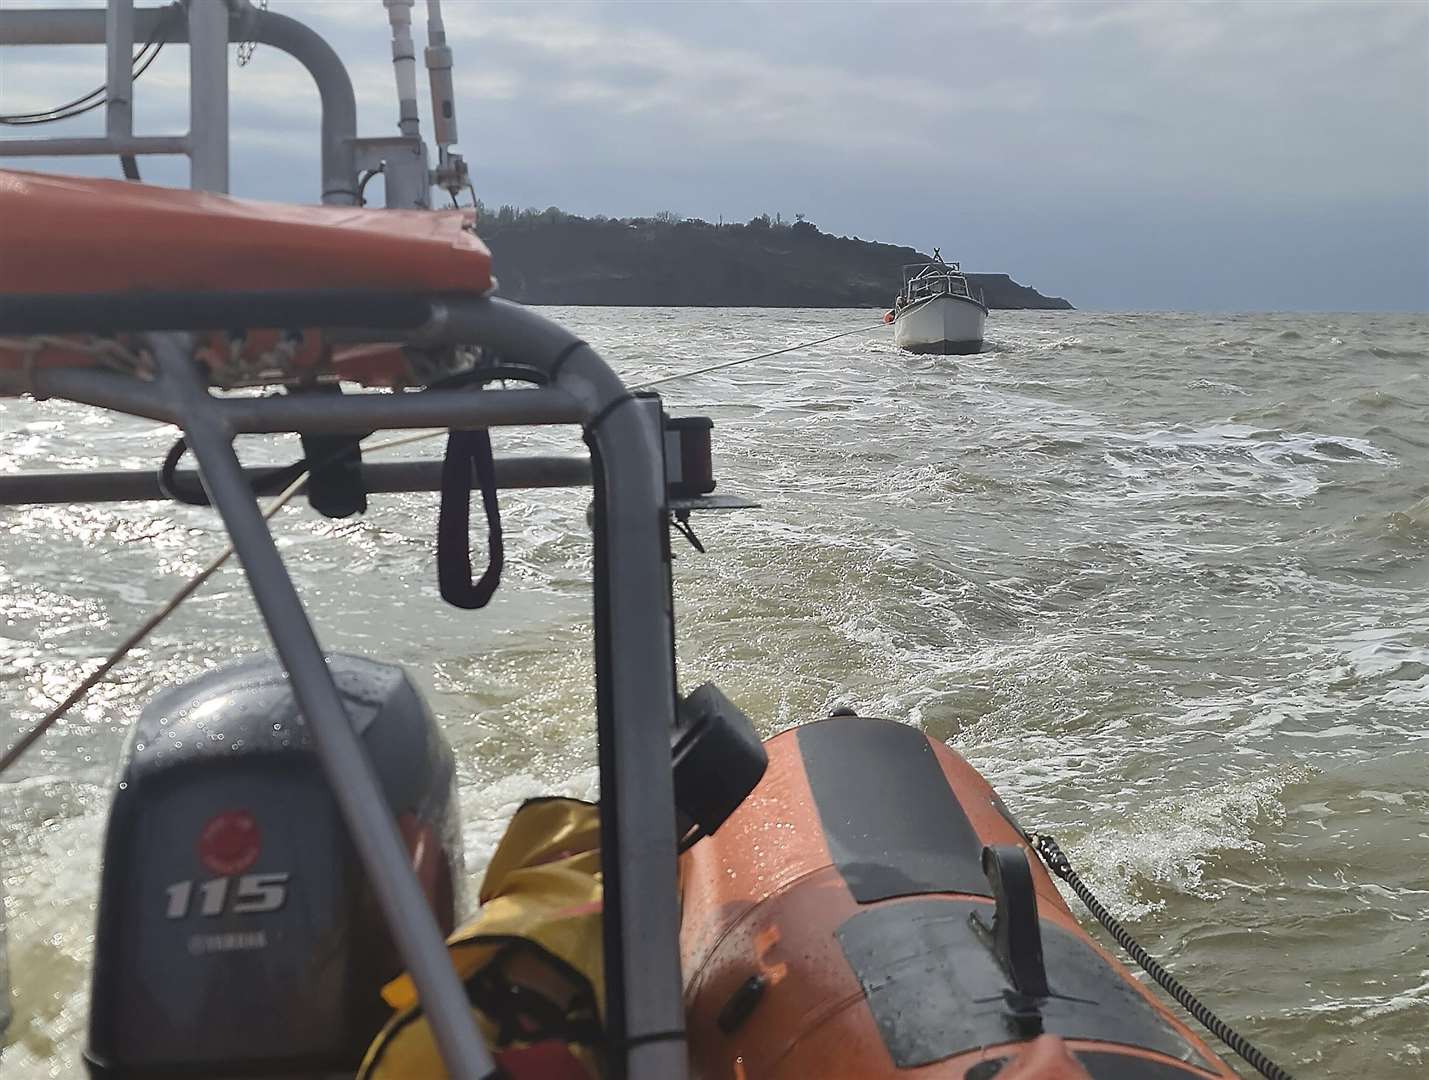 The seven-metre motor cruiser under tow by the Whitstable RNLI lifeboat on Wednesday afternoon. Picture: Ollie Myhill/RNLI Whitstable